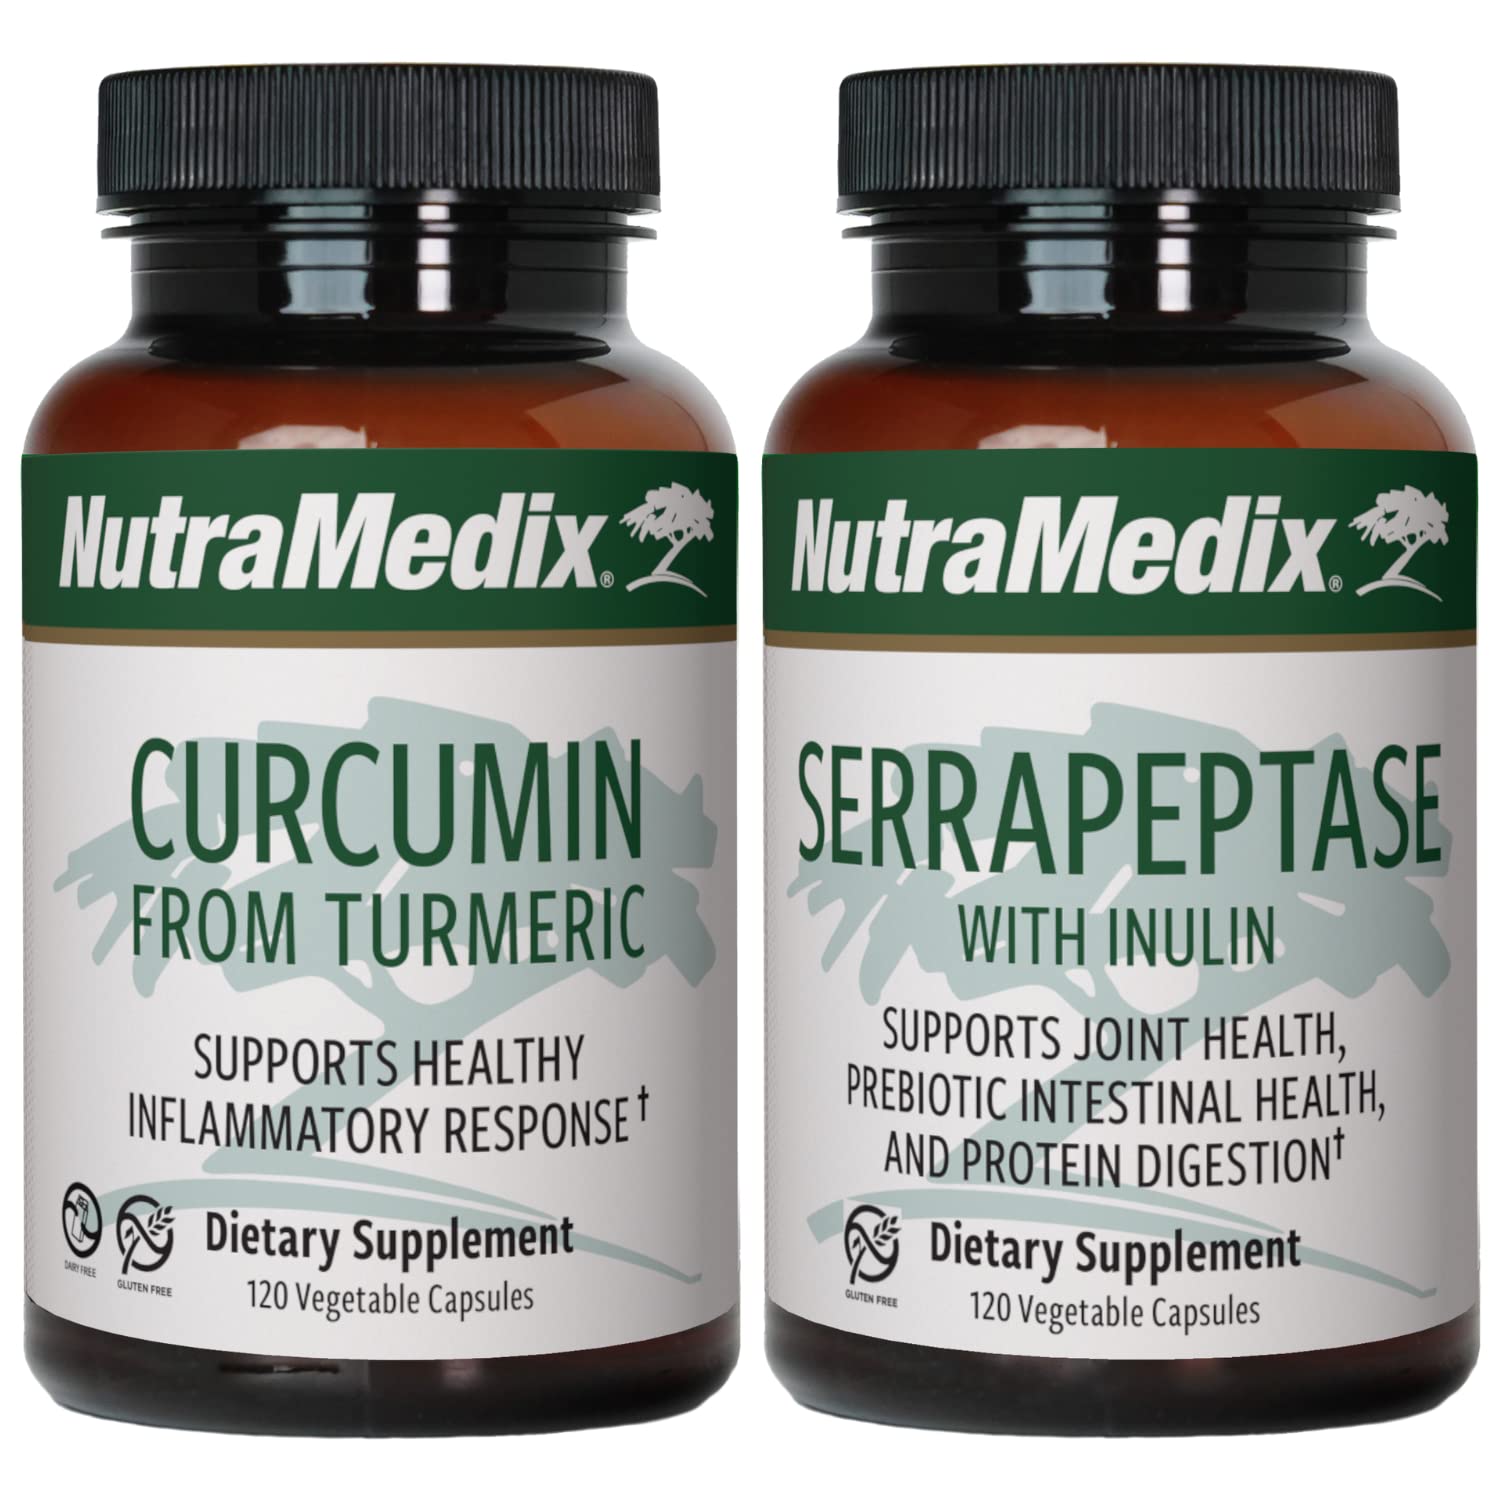 NutraMedix Joint Support Bundle - Includes Curcumin from Tur